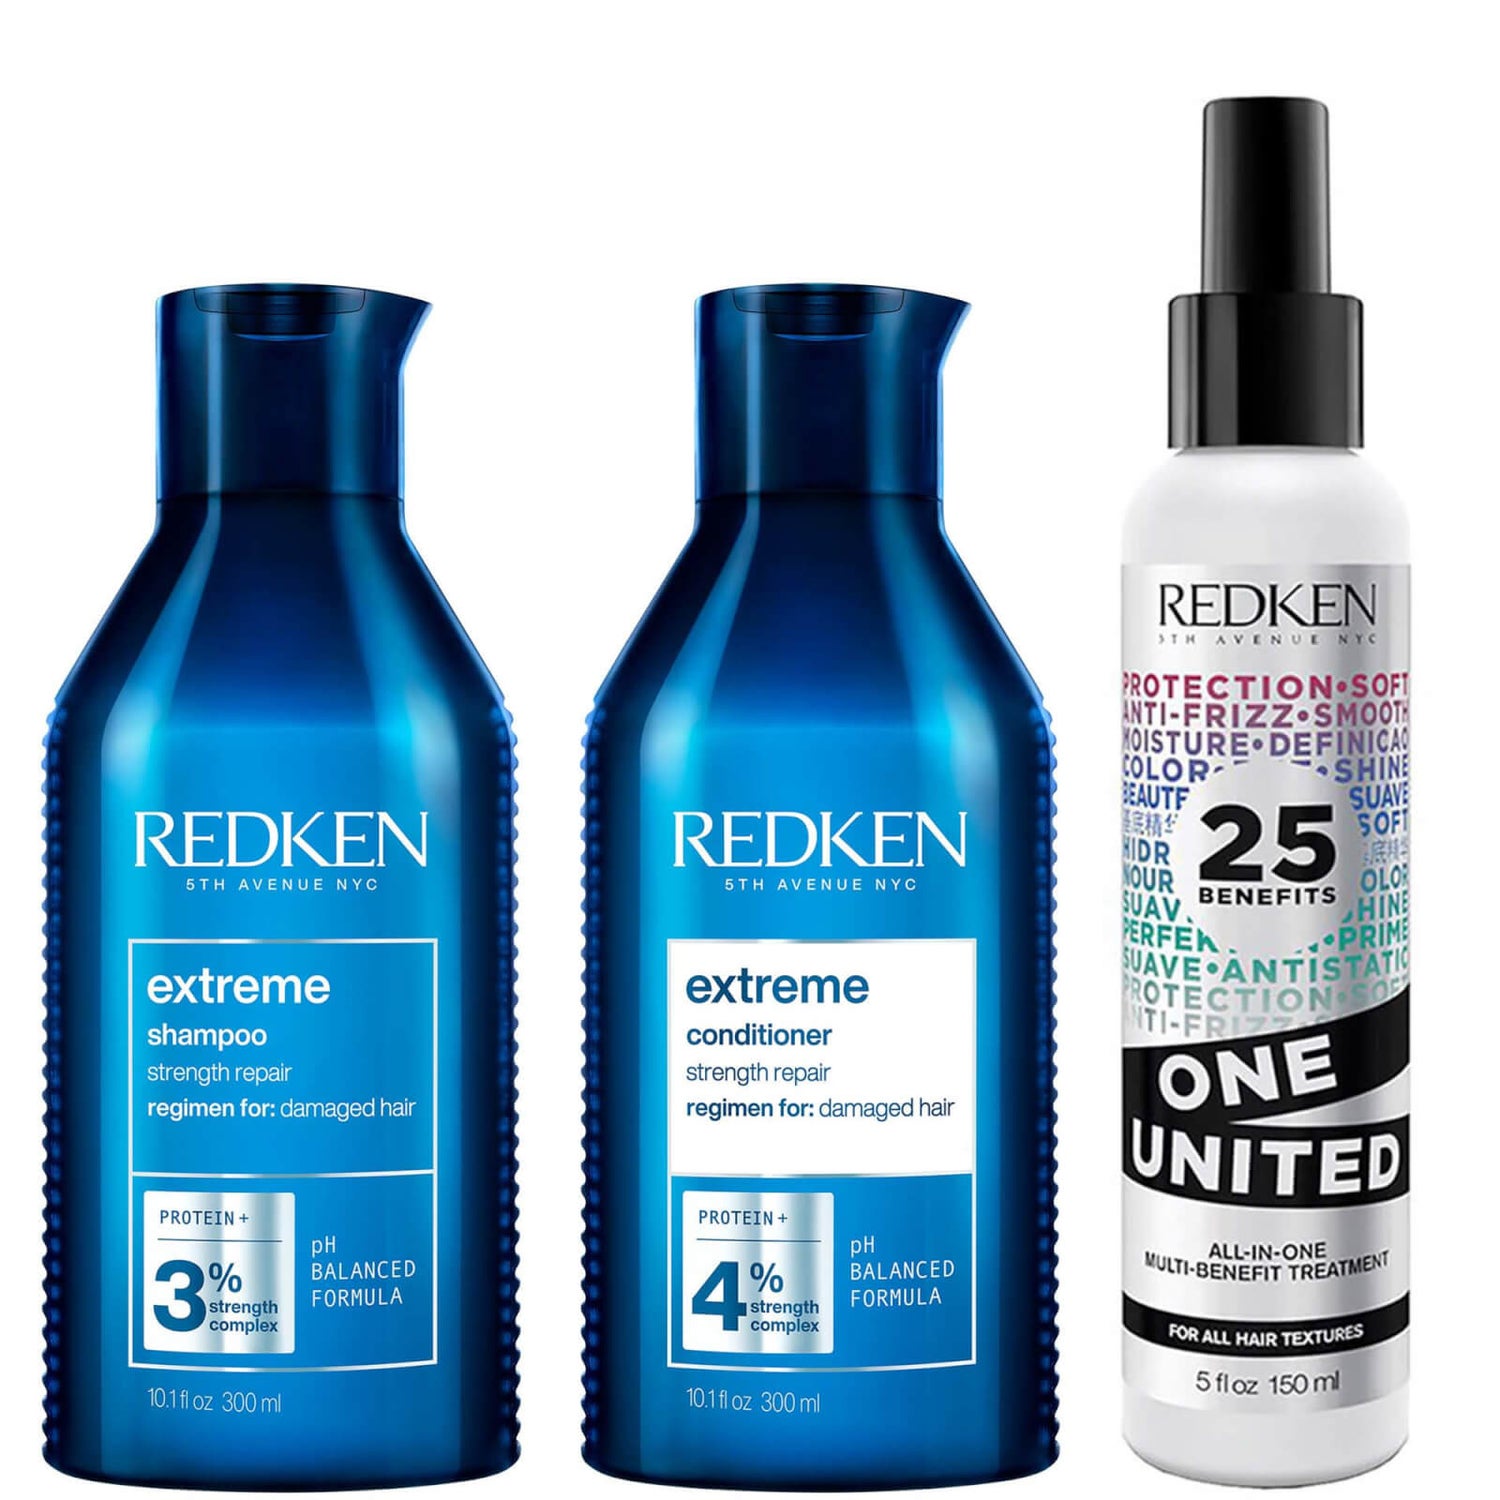 Redken Extreme Shampoo Conditioner and One United Multi-Benefit Leave-in Treatment Strength Repair Bundle for Damaged Hair